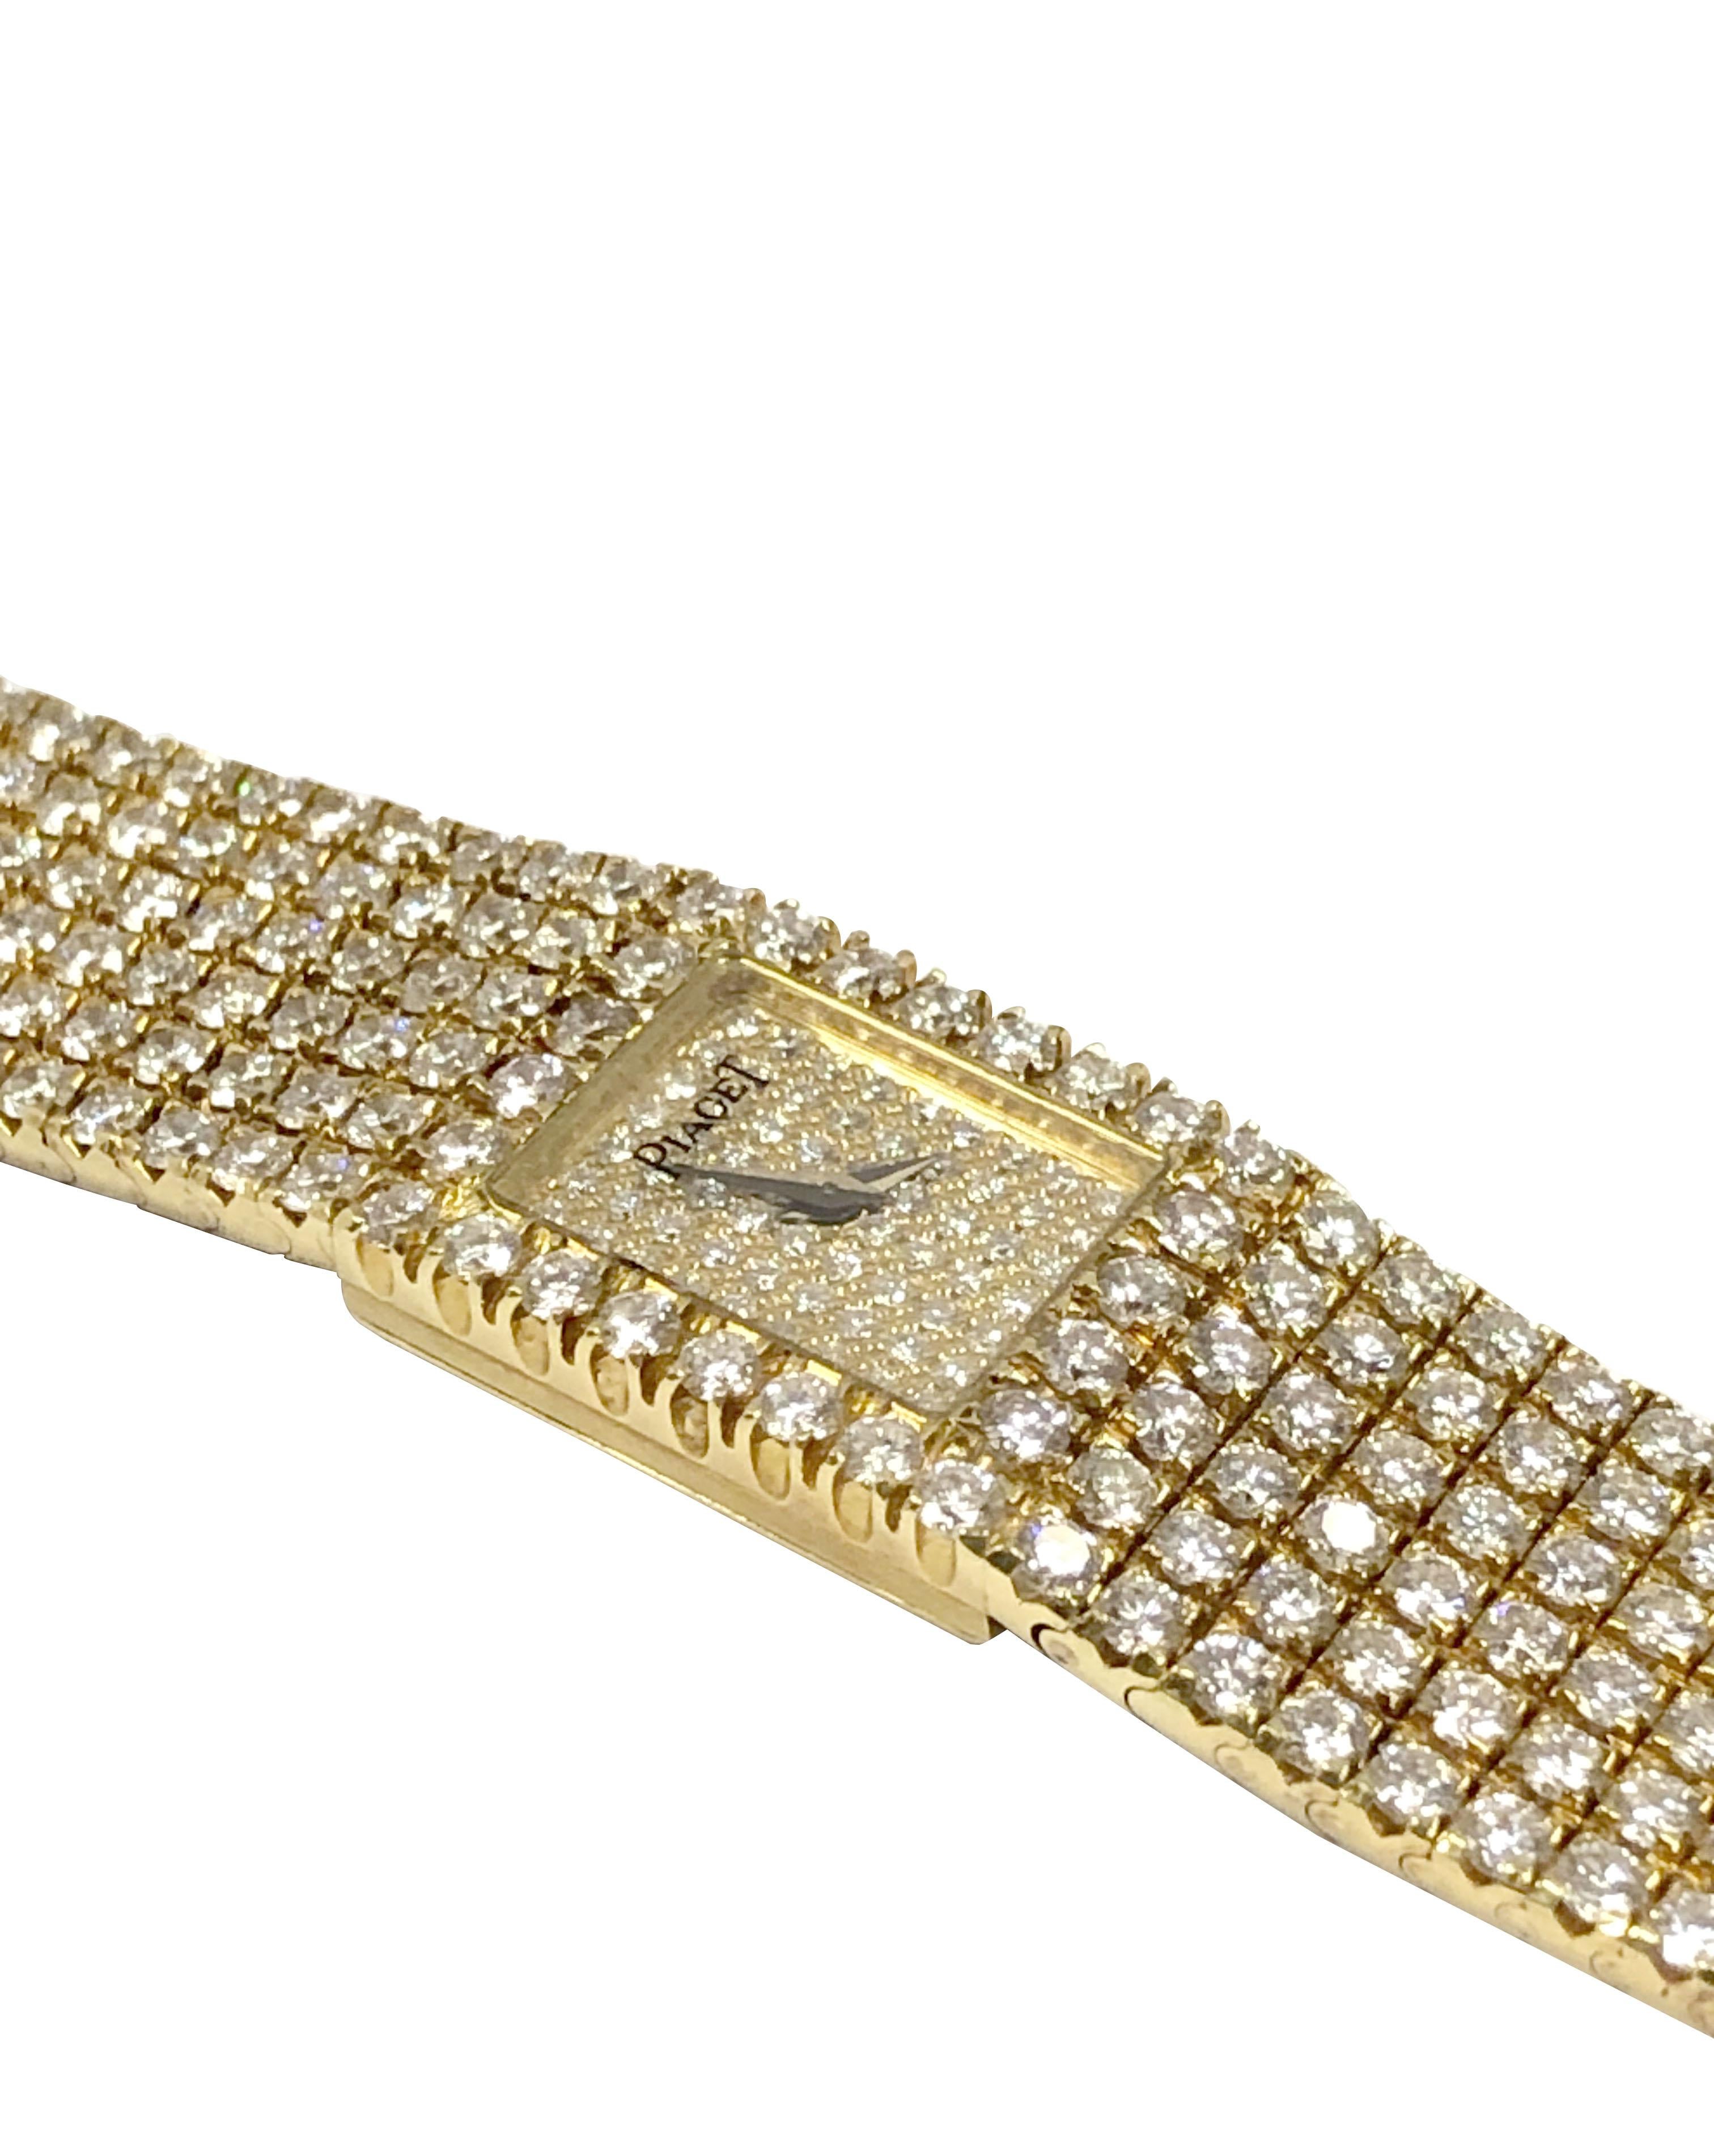 Circa 1990s Piaget Polo Reference 15201 Ladies 18k Yellow Gold Wrist Watch,  set with approximately 20 Carats of Fine White Round Brilliant cut Diamonds in a soft flexible bracelet, measuring 7 1/2 inches in length and just over 1/2 inch wide.